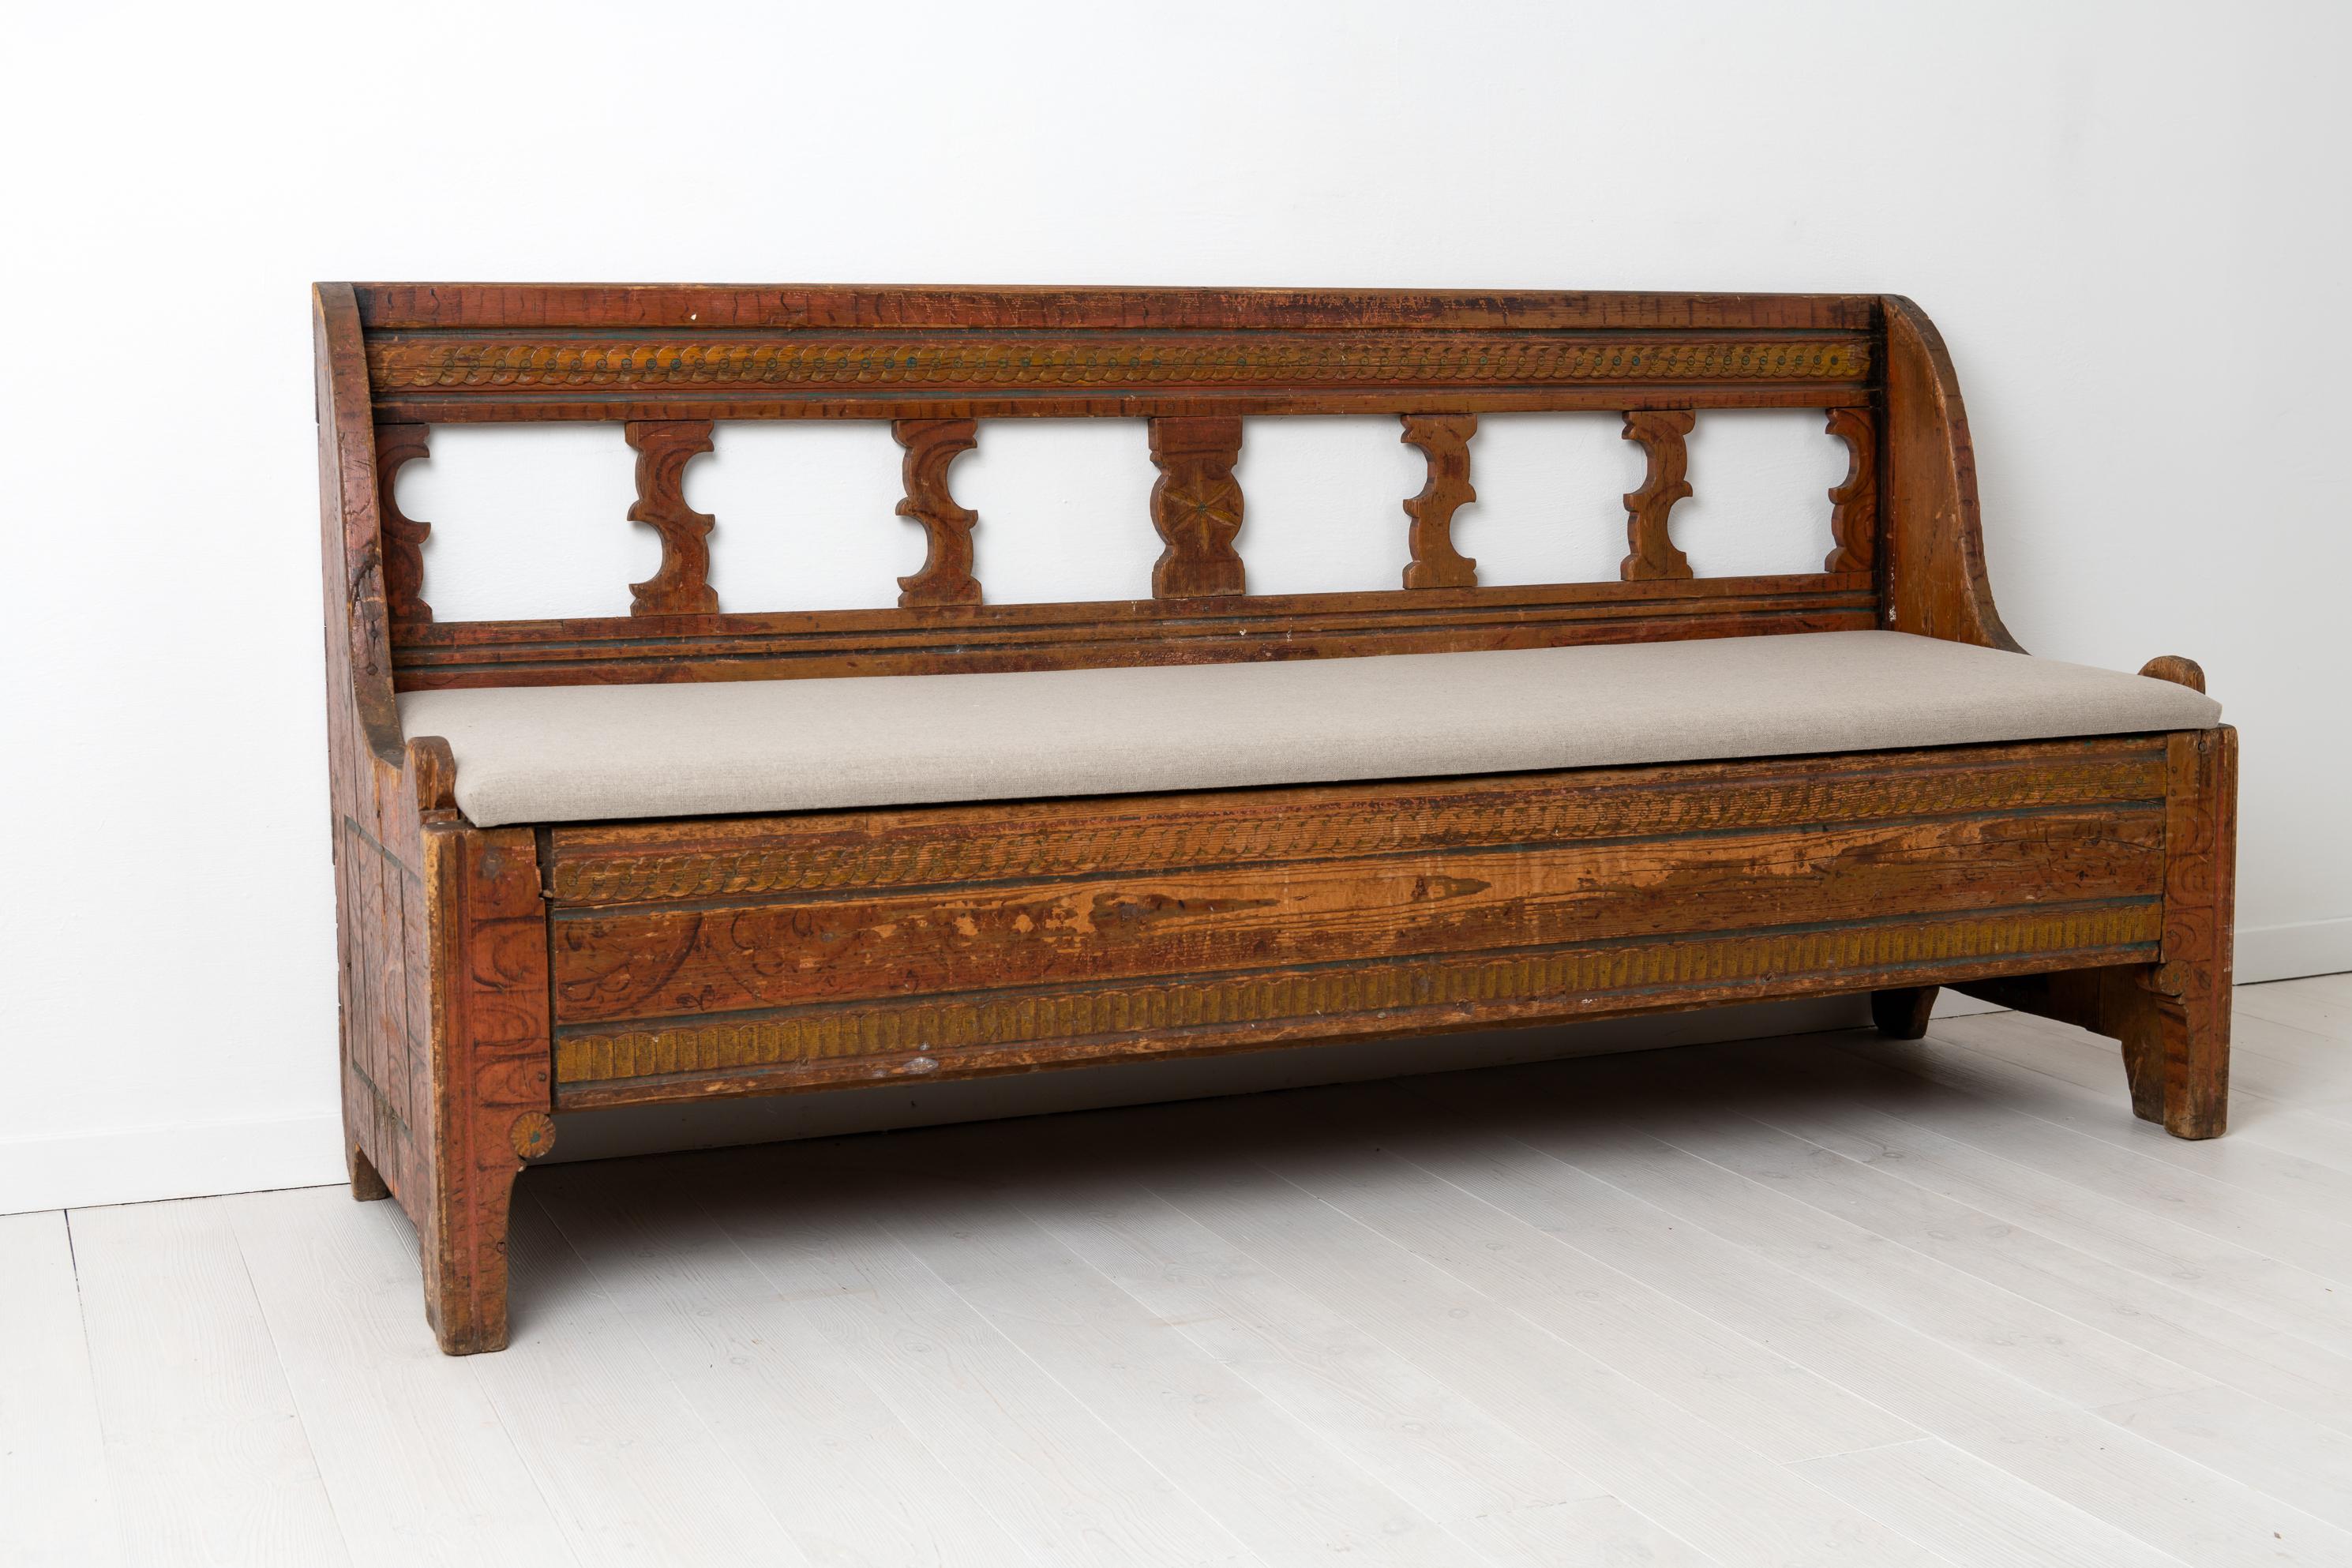 Gustavian country bench from the late 18th century. The bench is made in the very north of Sweden, close to the Finnish border in an area called Tornedalen. The bench is unusual and made in painted pine with the original faux paint and intricate